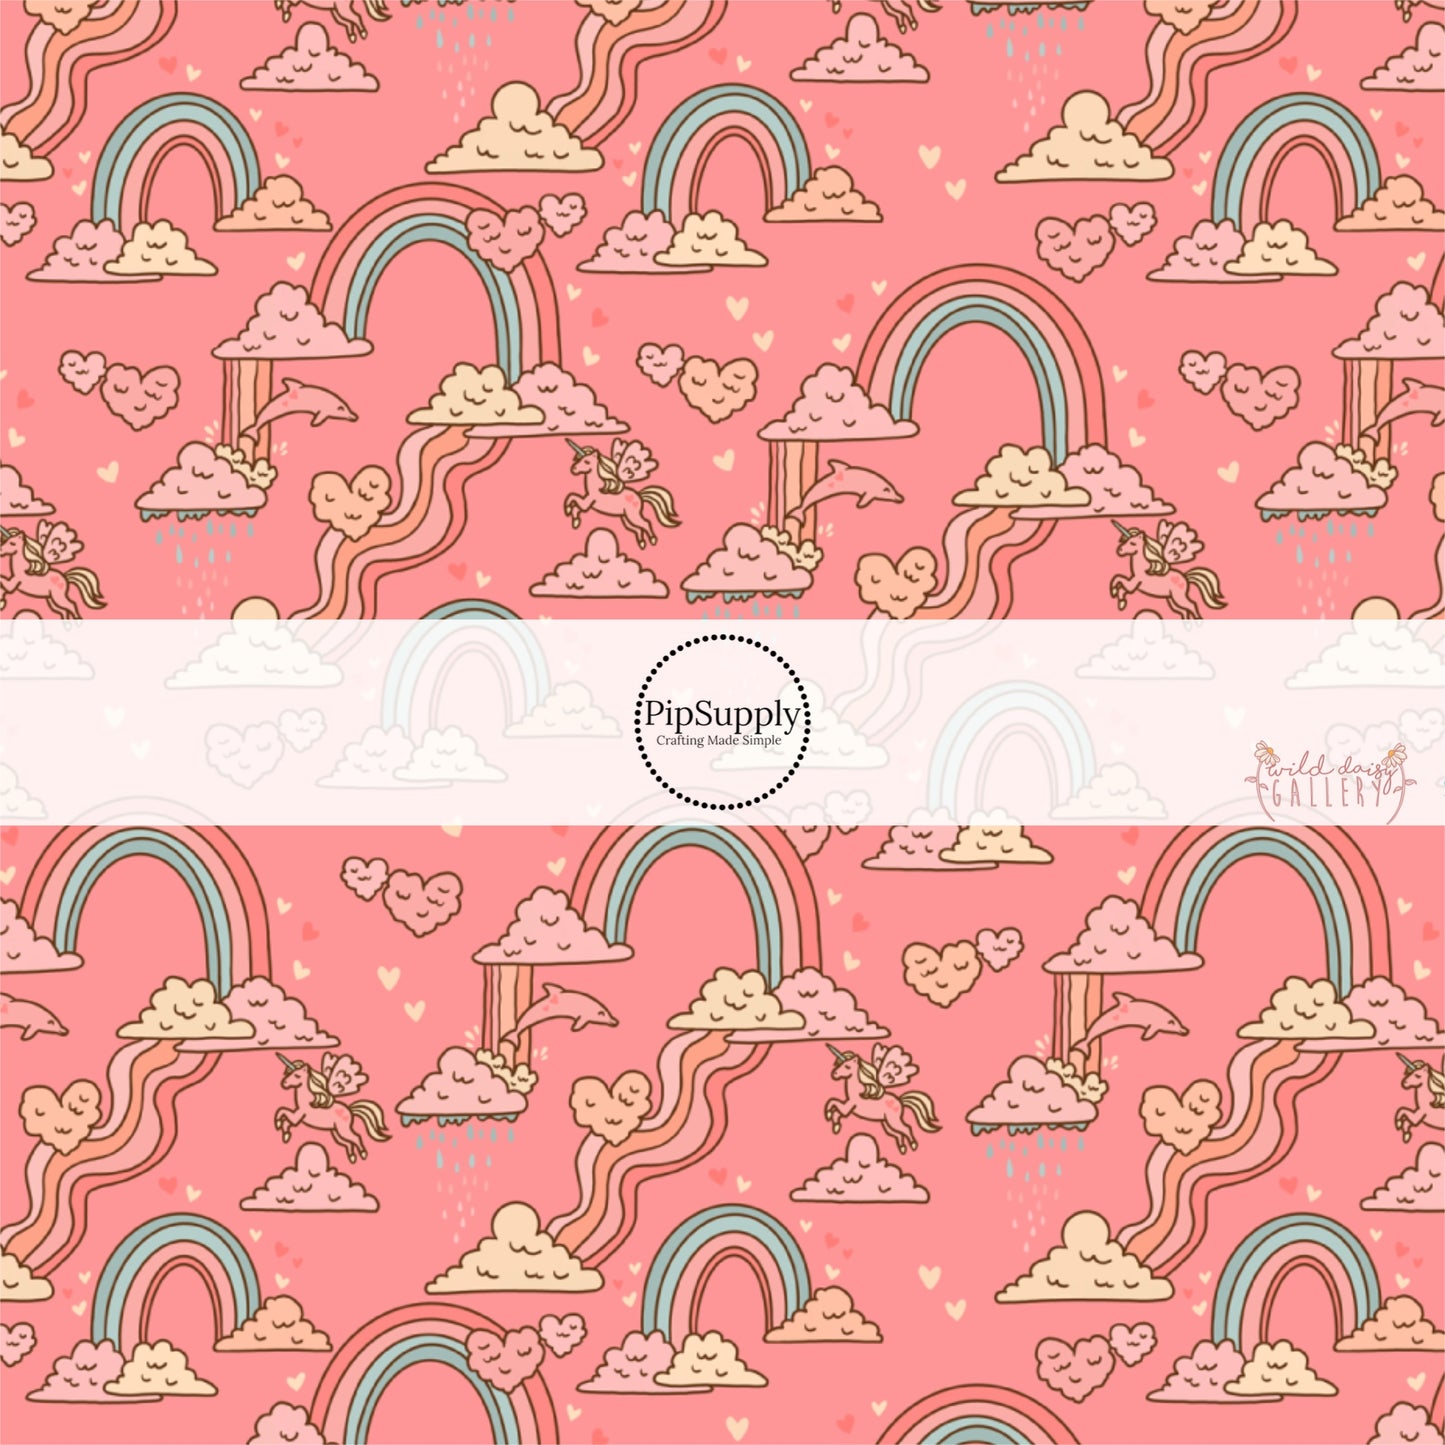 Wavy Rainbows, Hearts, Unicorns, and Dolphins on Pink Fabric by the Yard.